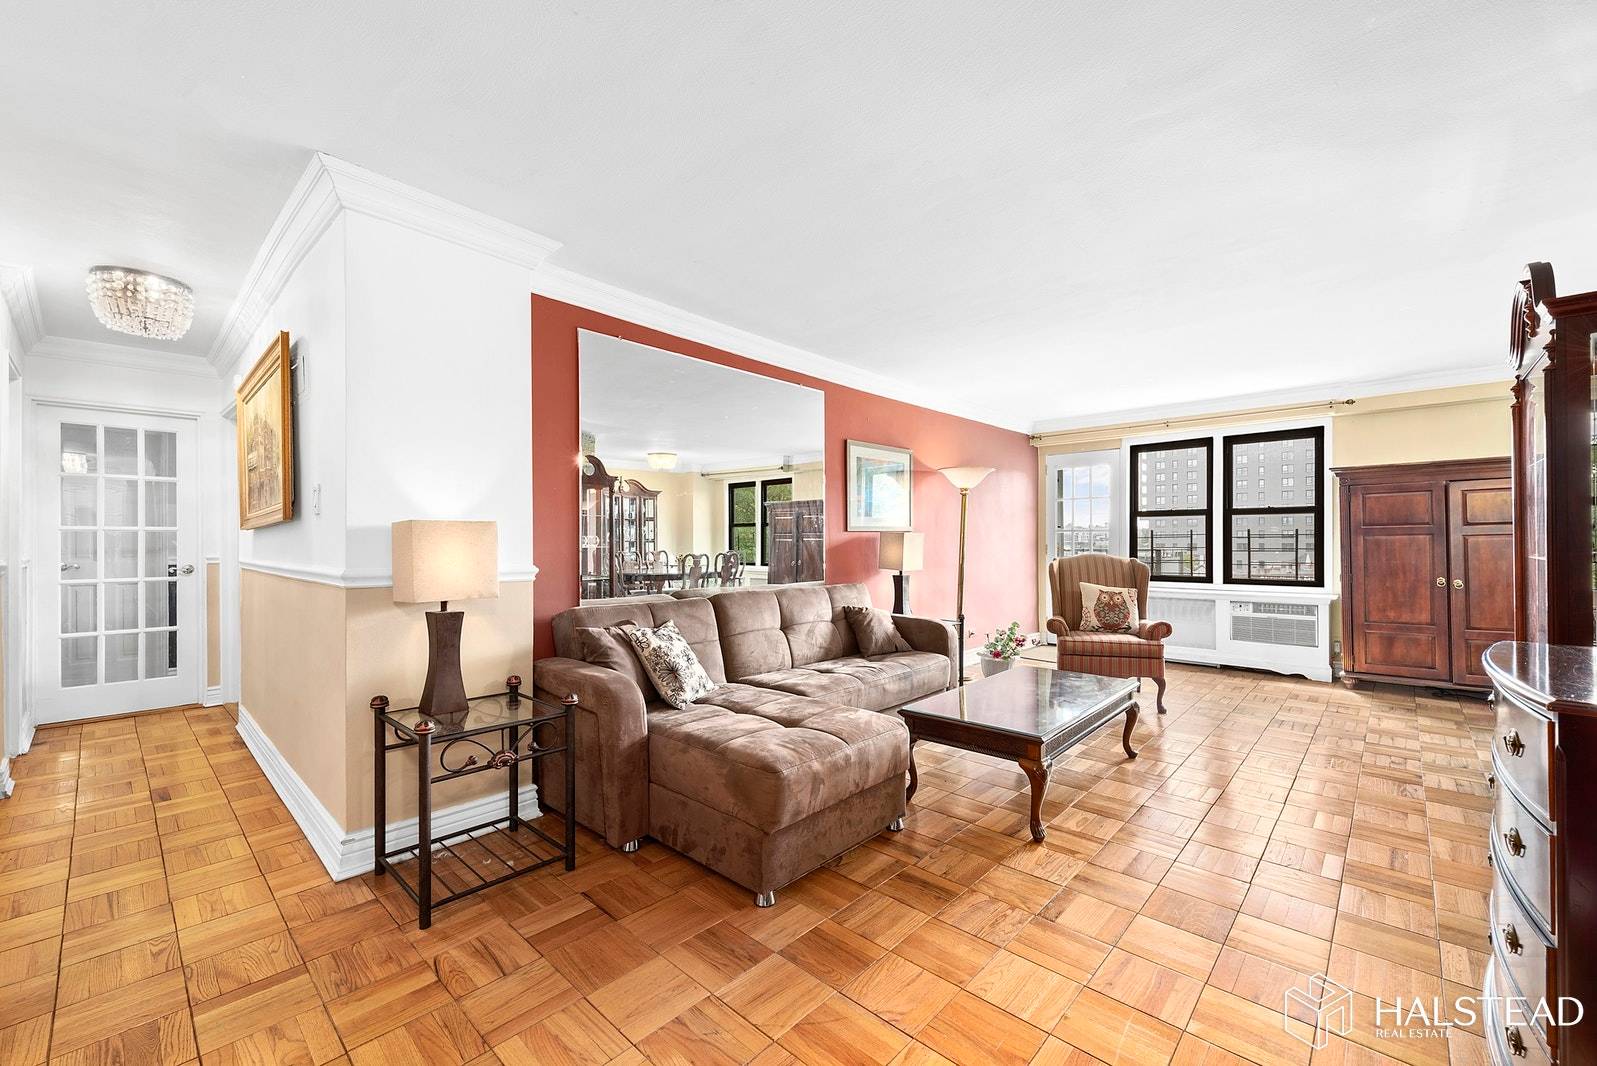 JUST LISTED ! ! ! FULLY FURNISHED, HUGE Corner Two Bedroom Two FULL Bath Apartment with BALCONY Offers a Rare Rental Opportunity at The Birchwood House a Premiere Jackson Heights ...